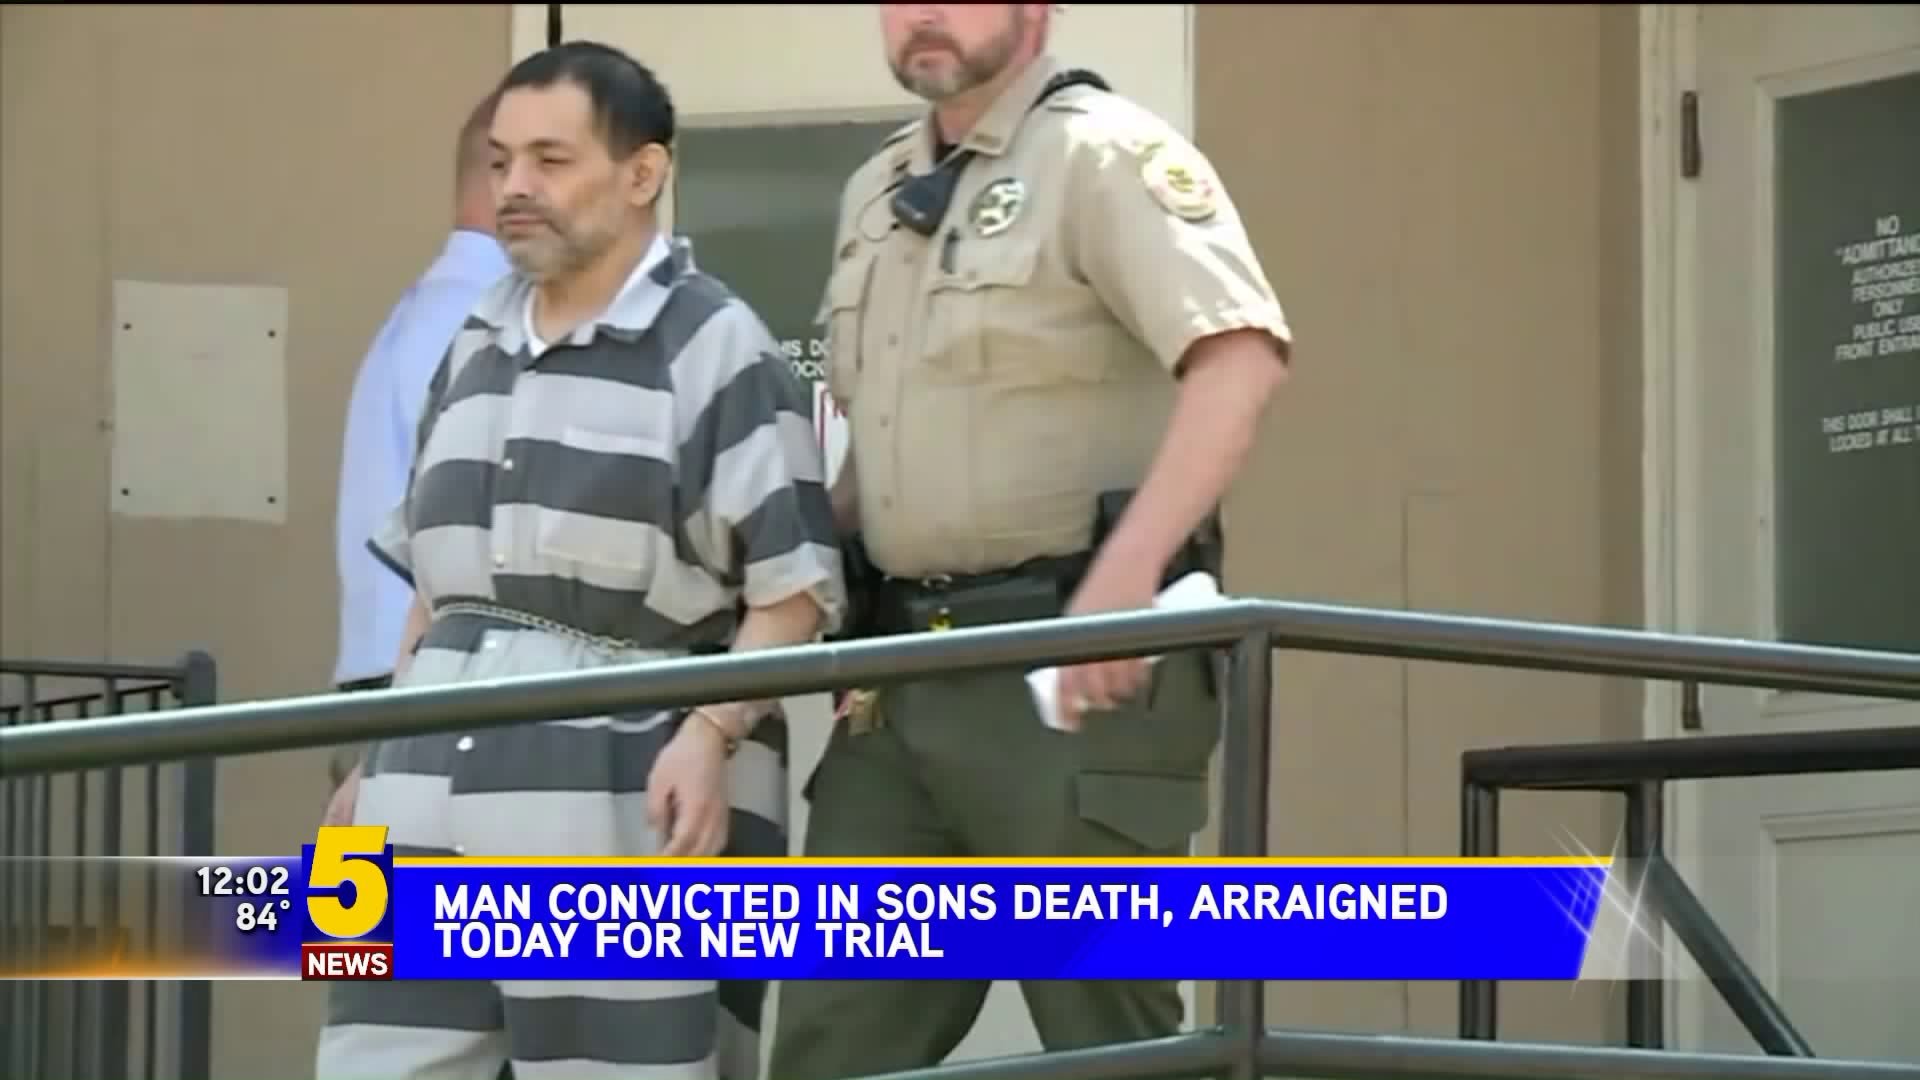 Man Convicted in Sons Death, Arraigned for New Trial